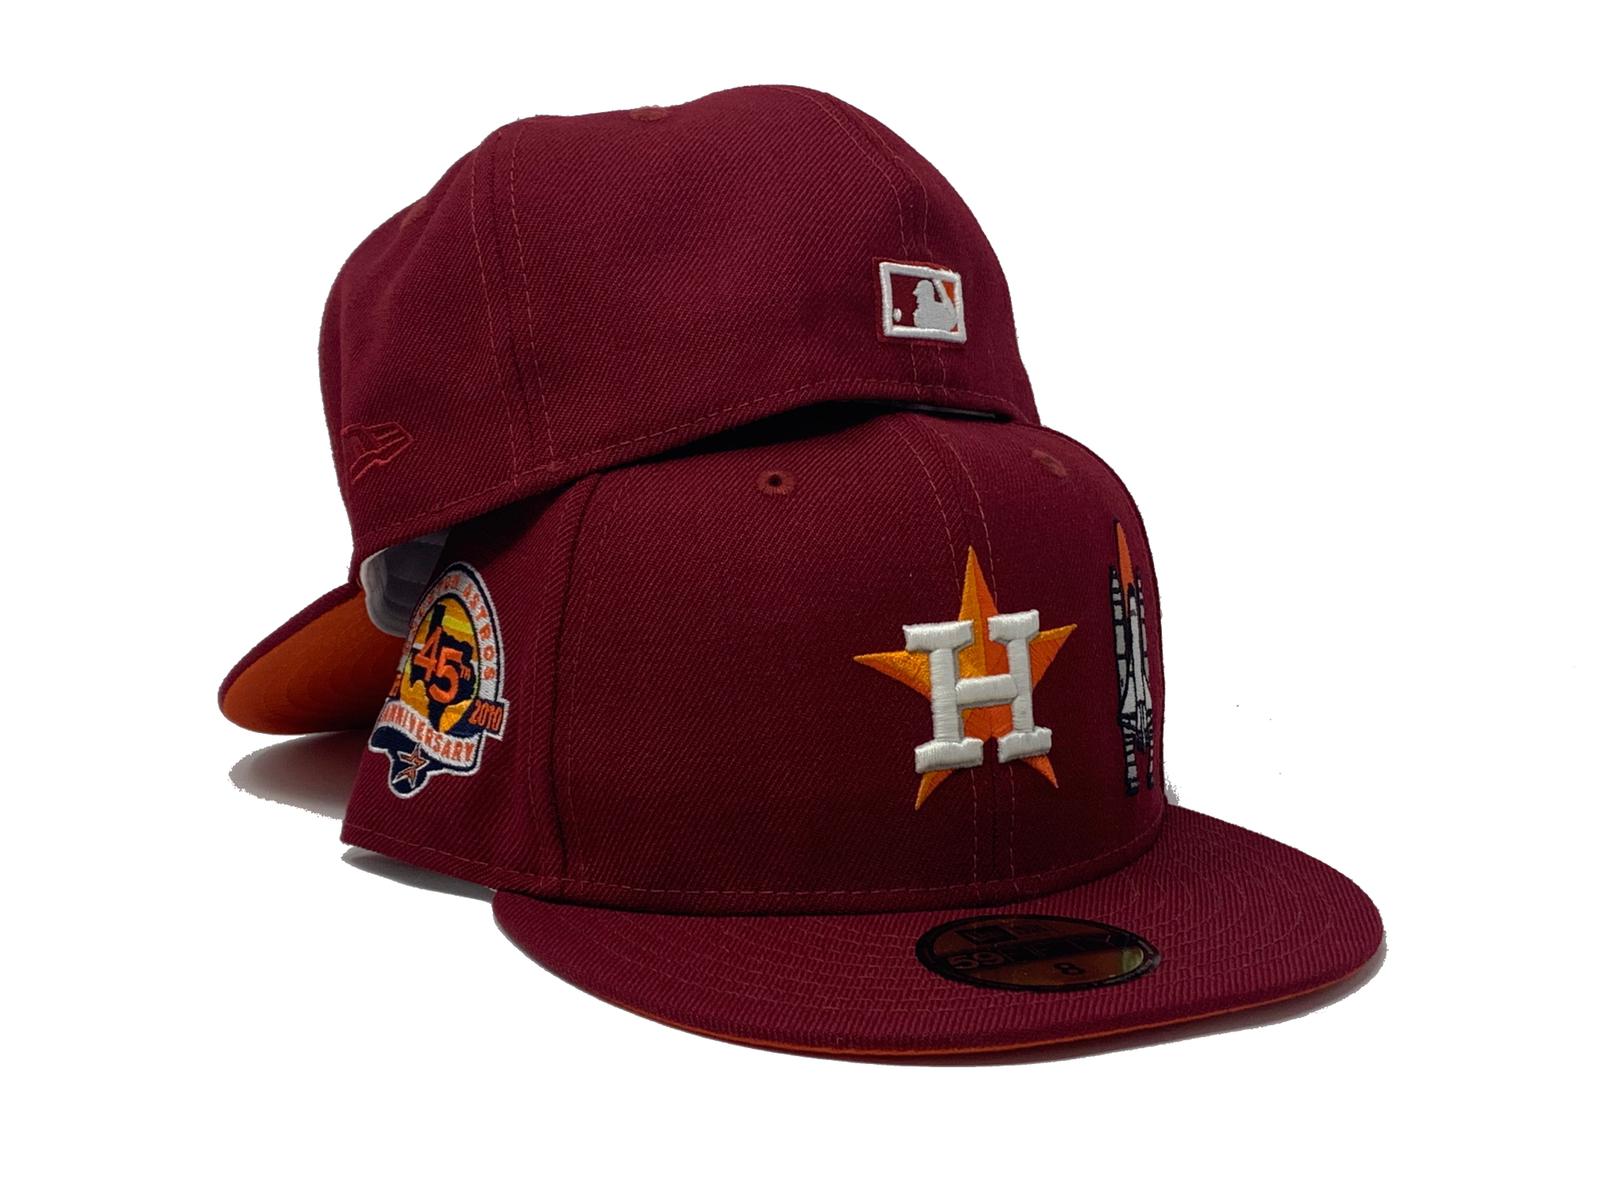 2005 Houston Astros maroon adult Medium shirt baseball team htwown Texas  MLB best gift hat decor collectable by Majestic